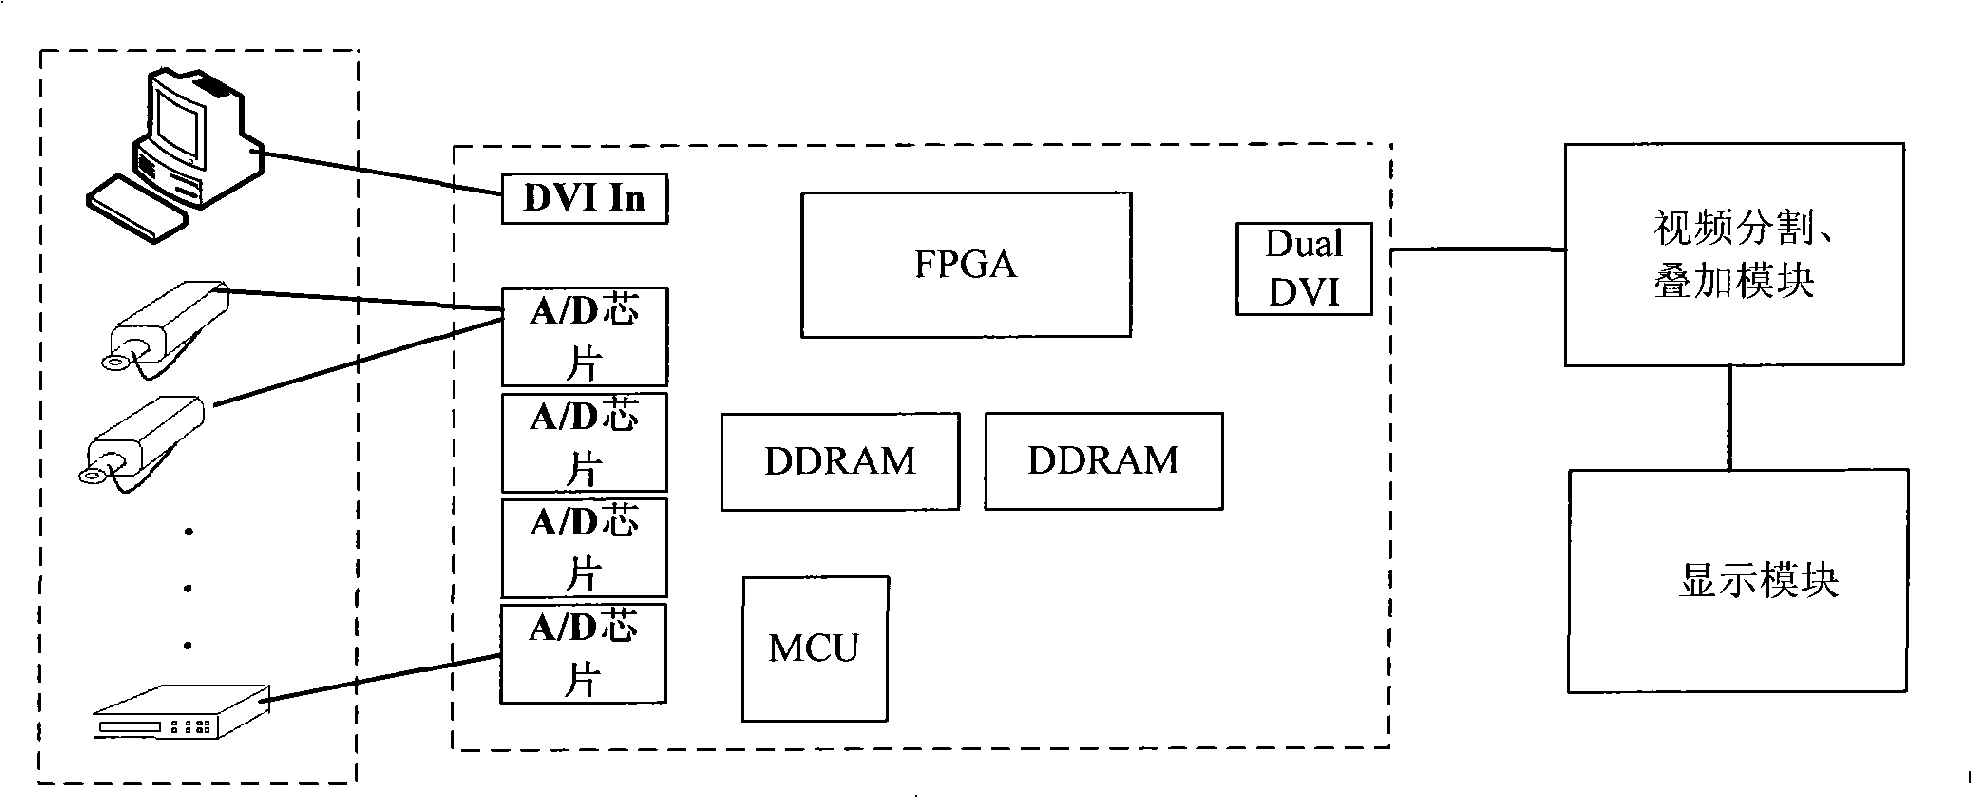 Multi-path video data acquiring, processing and transmitting device and method thereof